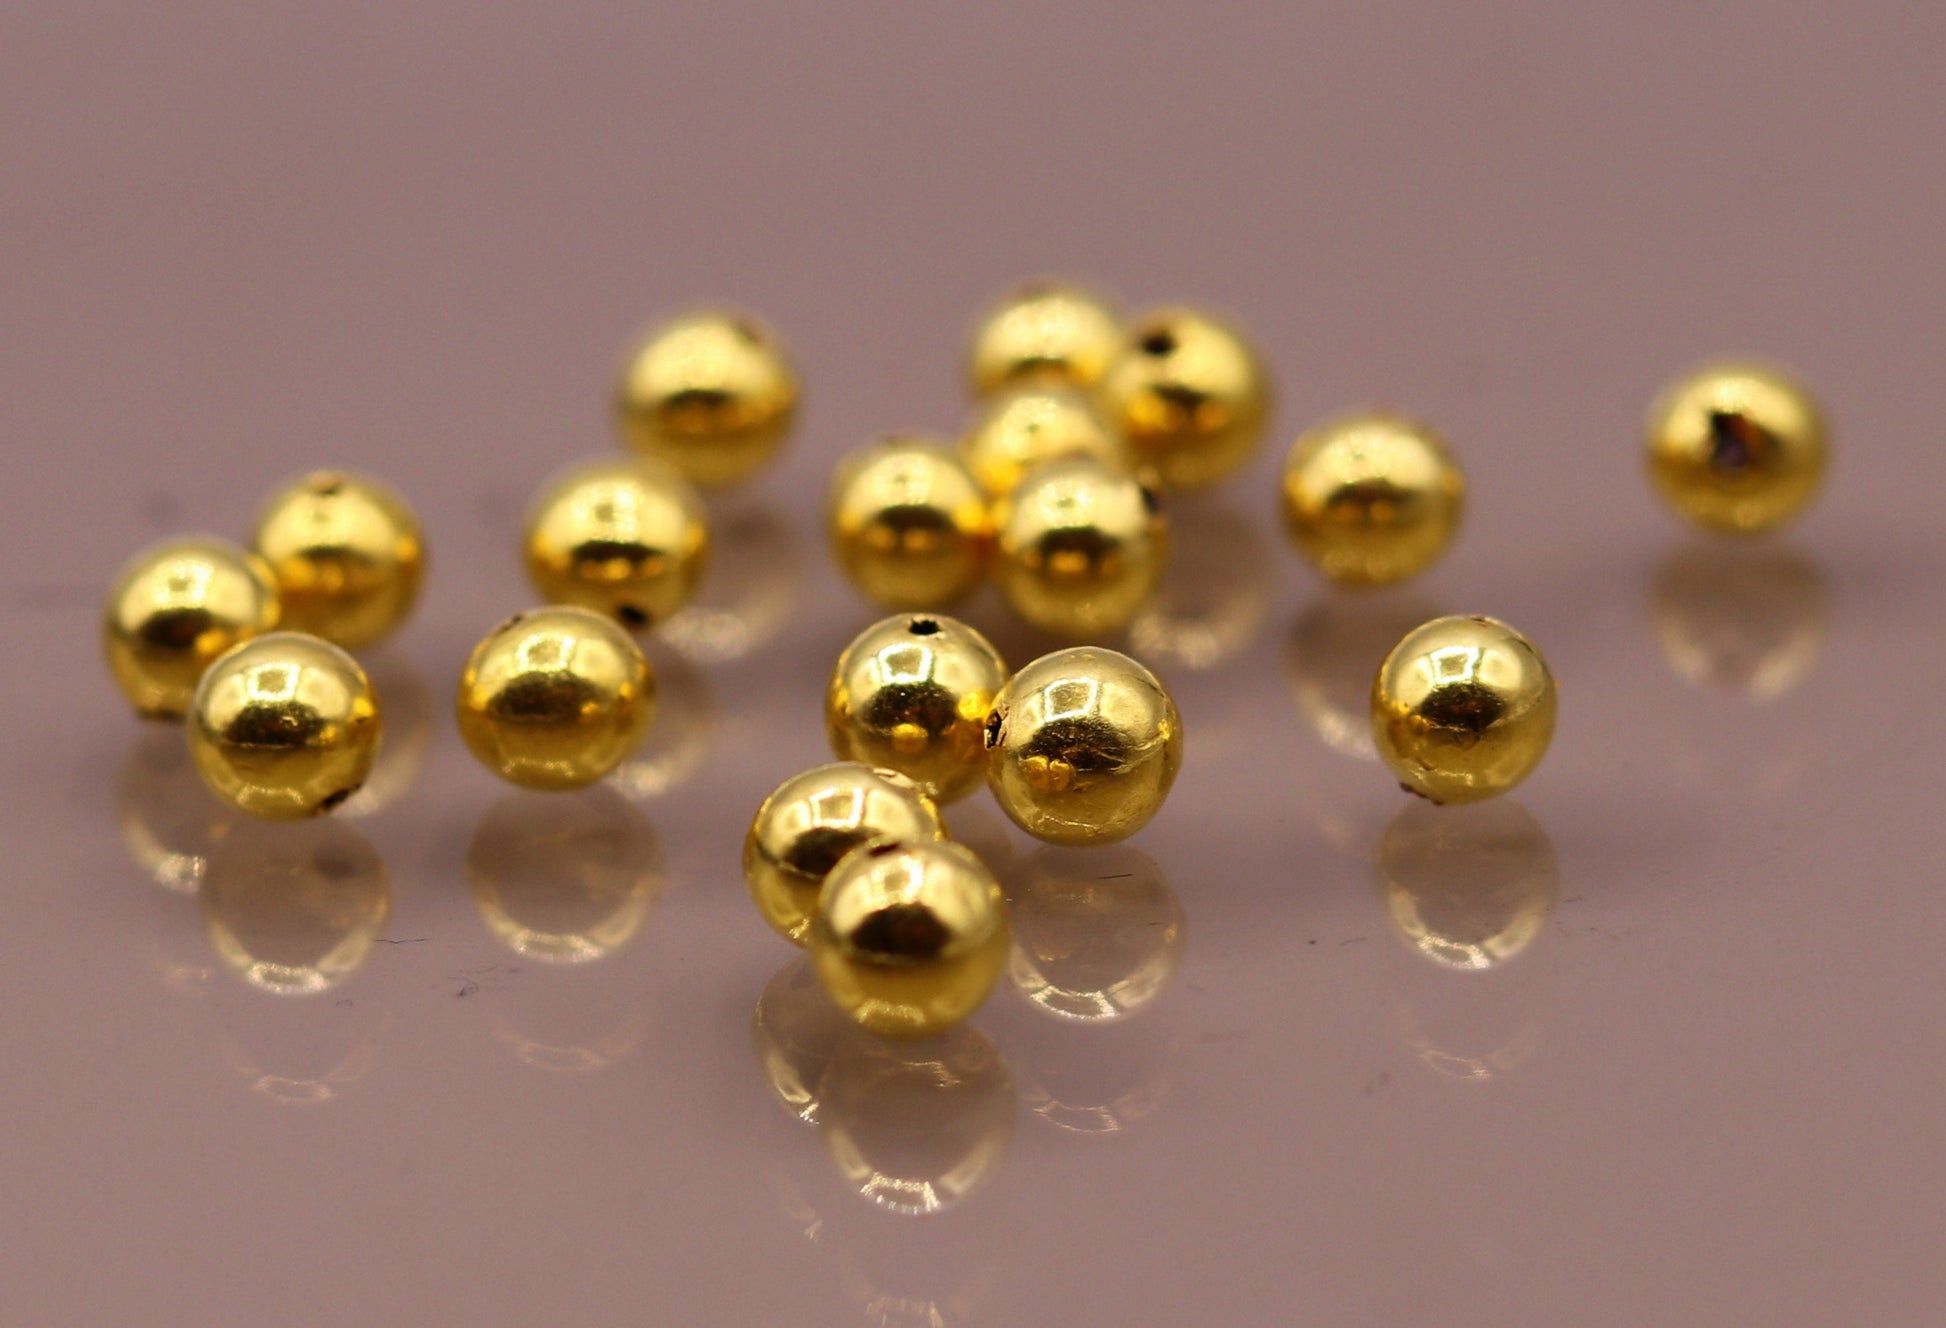 20 karat yellow gold handmade lot 10 pc beads for jewelry making ideas , jewelry finding and beads ball making excellent jewelry - TRIBAL ORNAMENTS